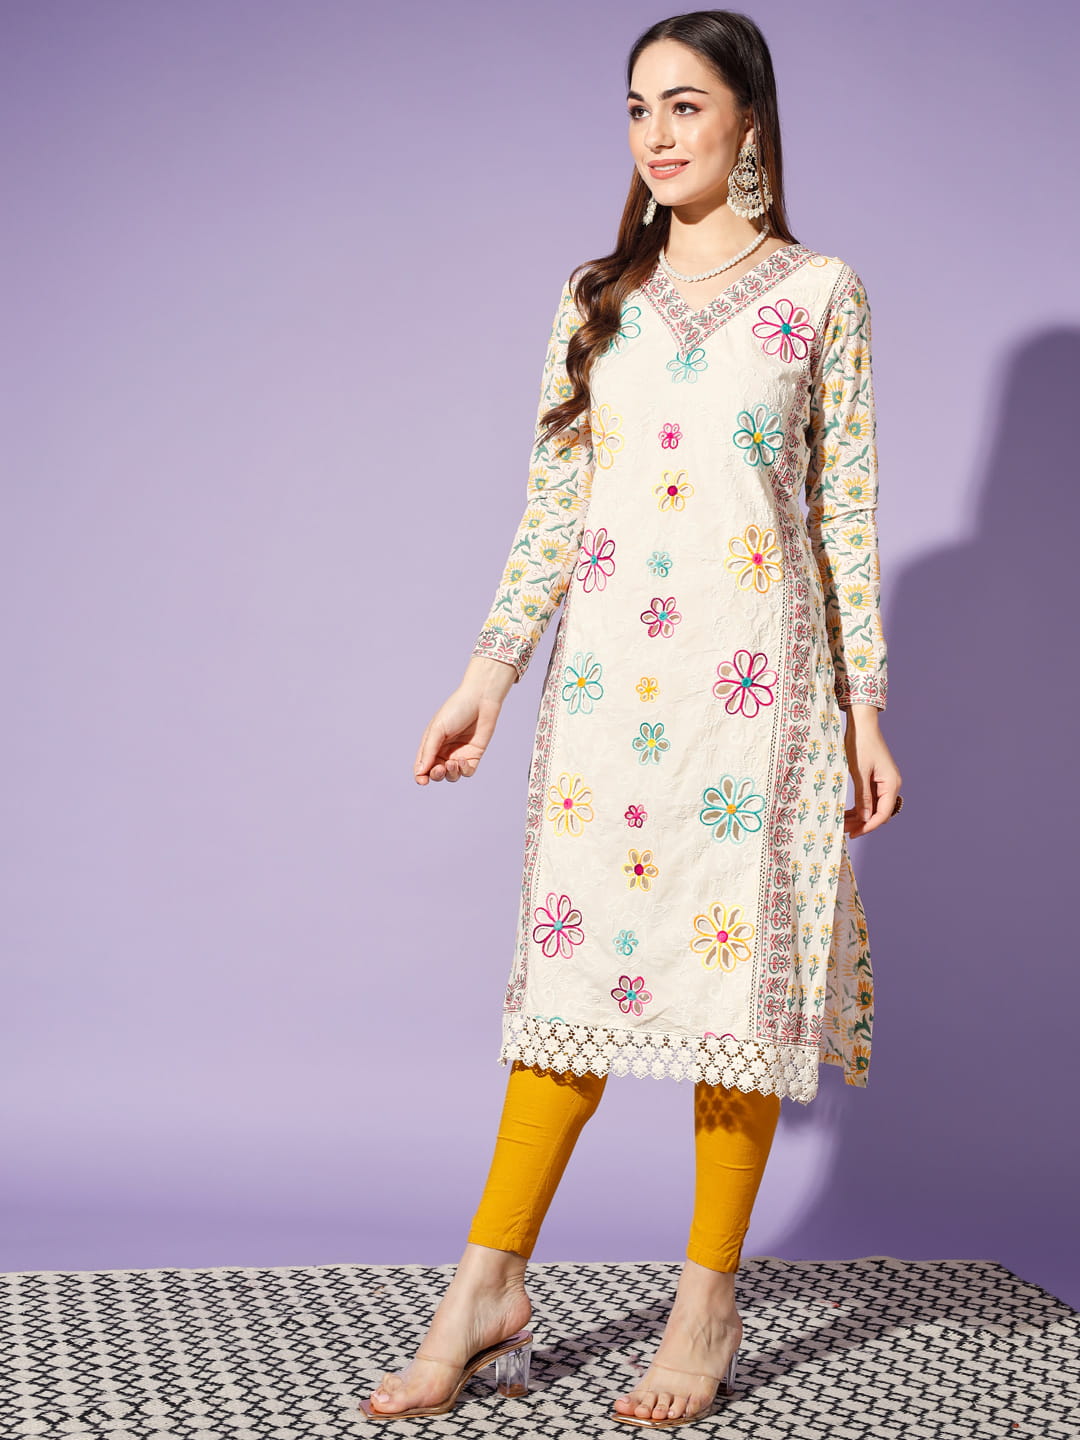 Blossoming Whispers: A White Kurti Adorned with Embellished Flowers | Hues of India